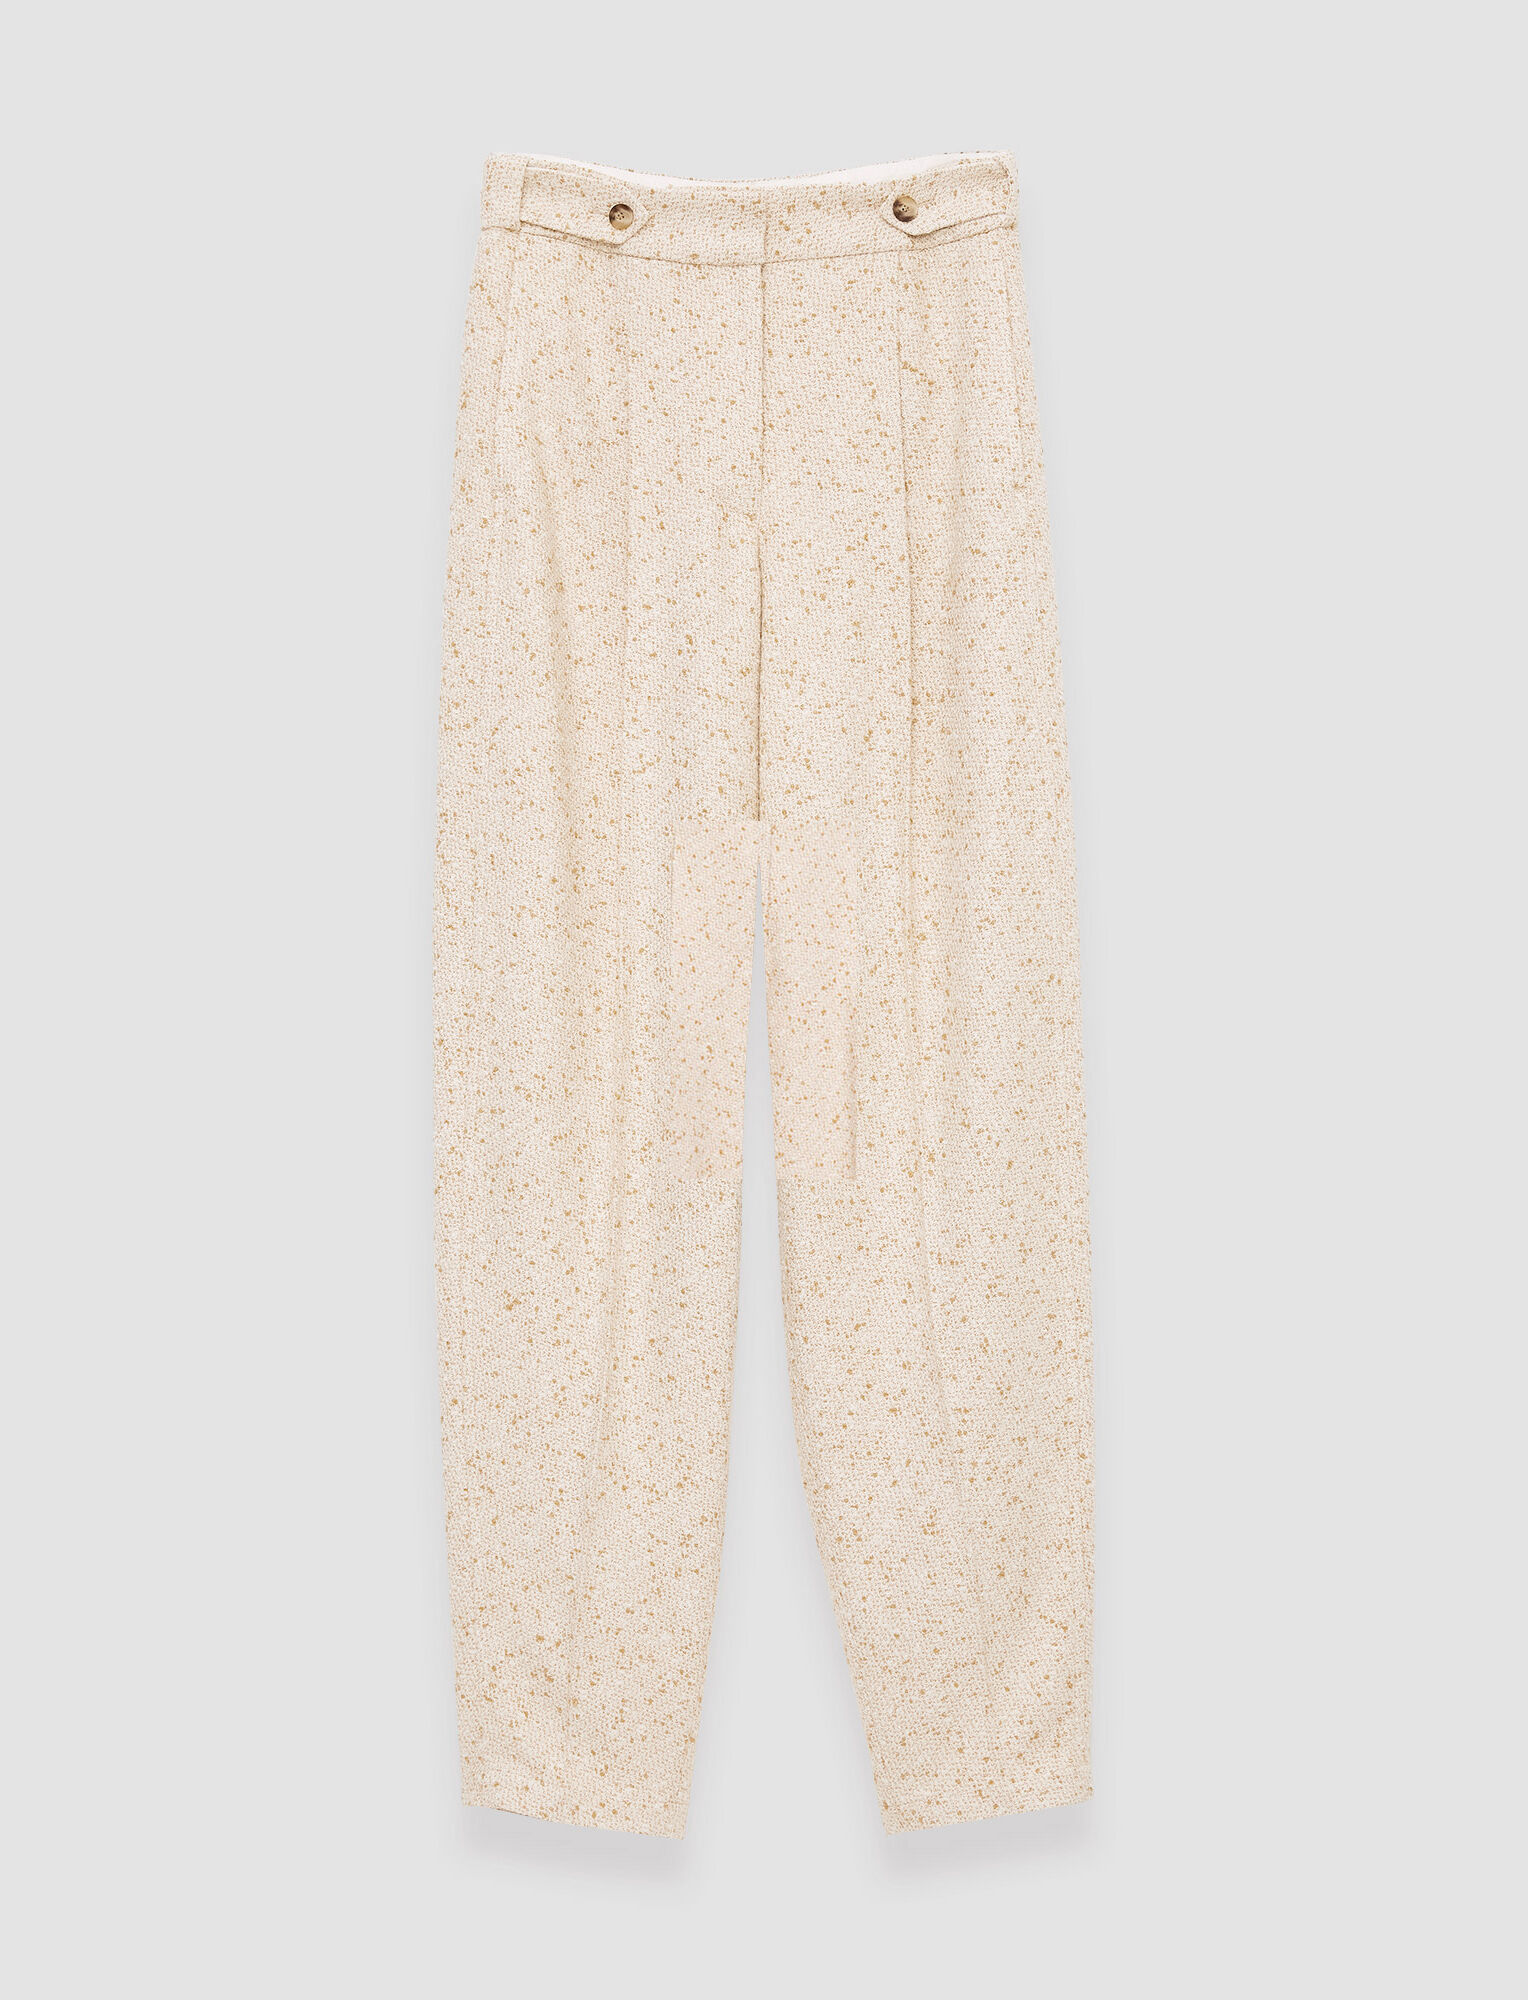 Joseph Tweed Timothy Trousers In Ivory/clay